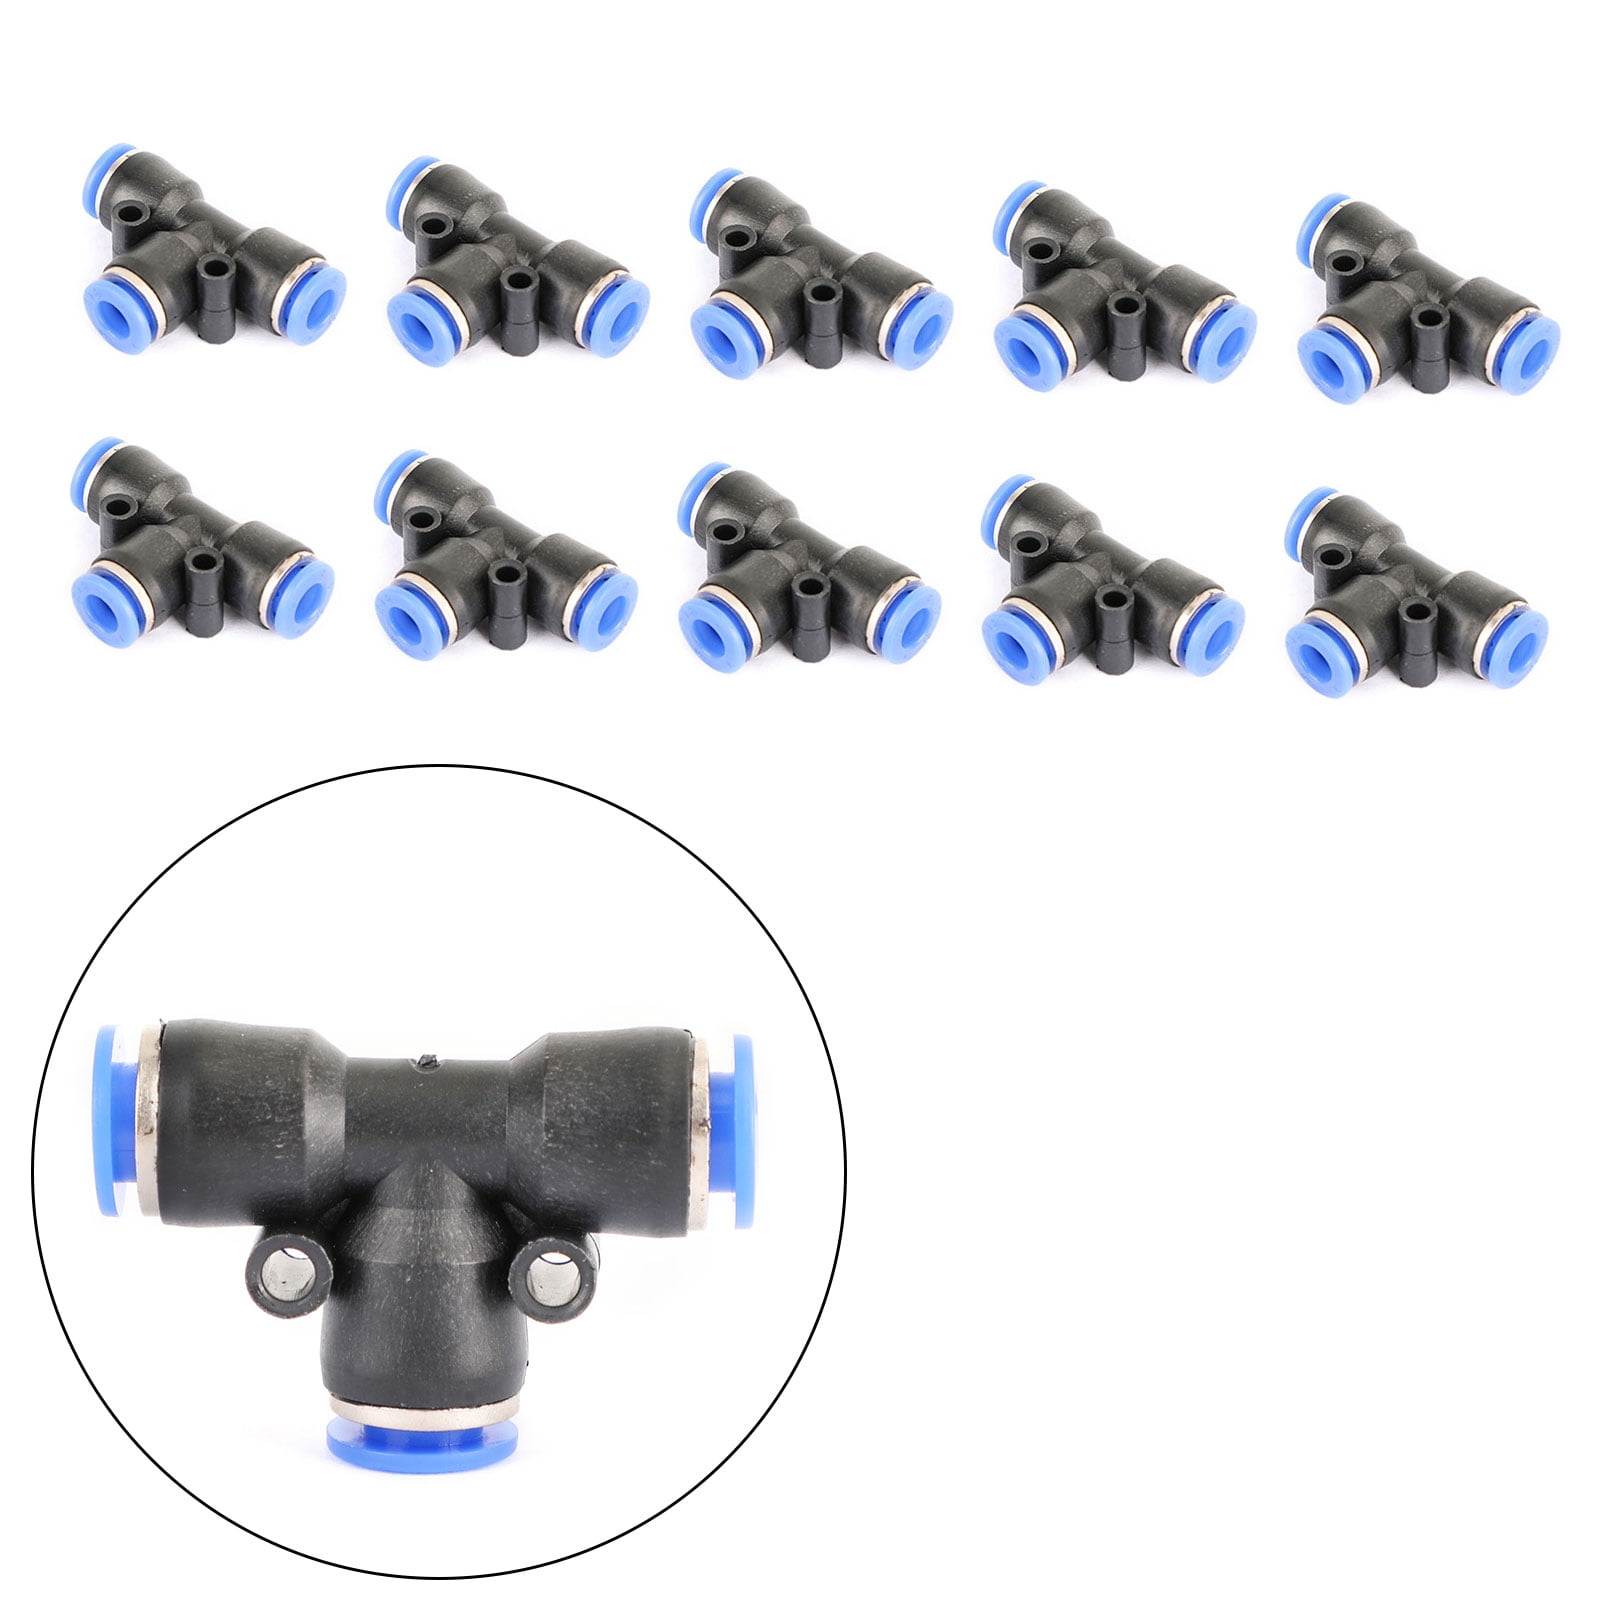 10 Pcs 6mm to 10mm Tube Dia 2 Ways Air Pneumatic Quick Joint Fittings for sale online 